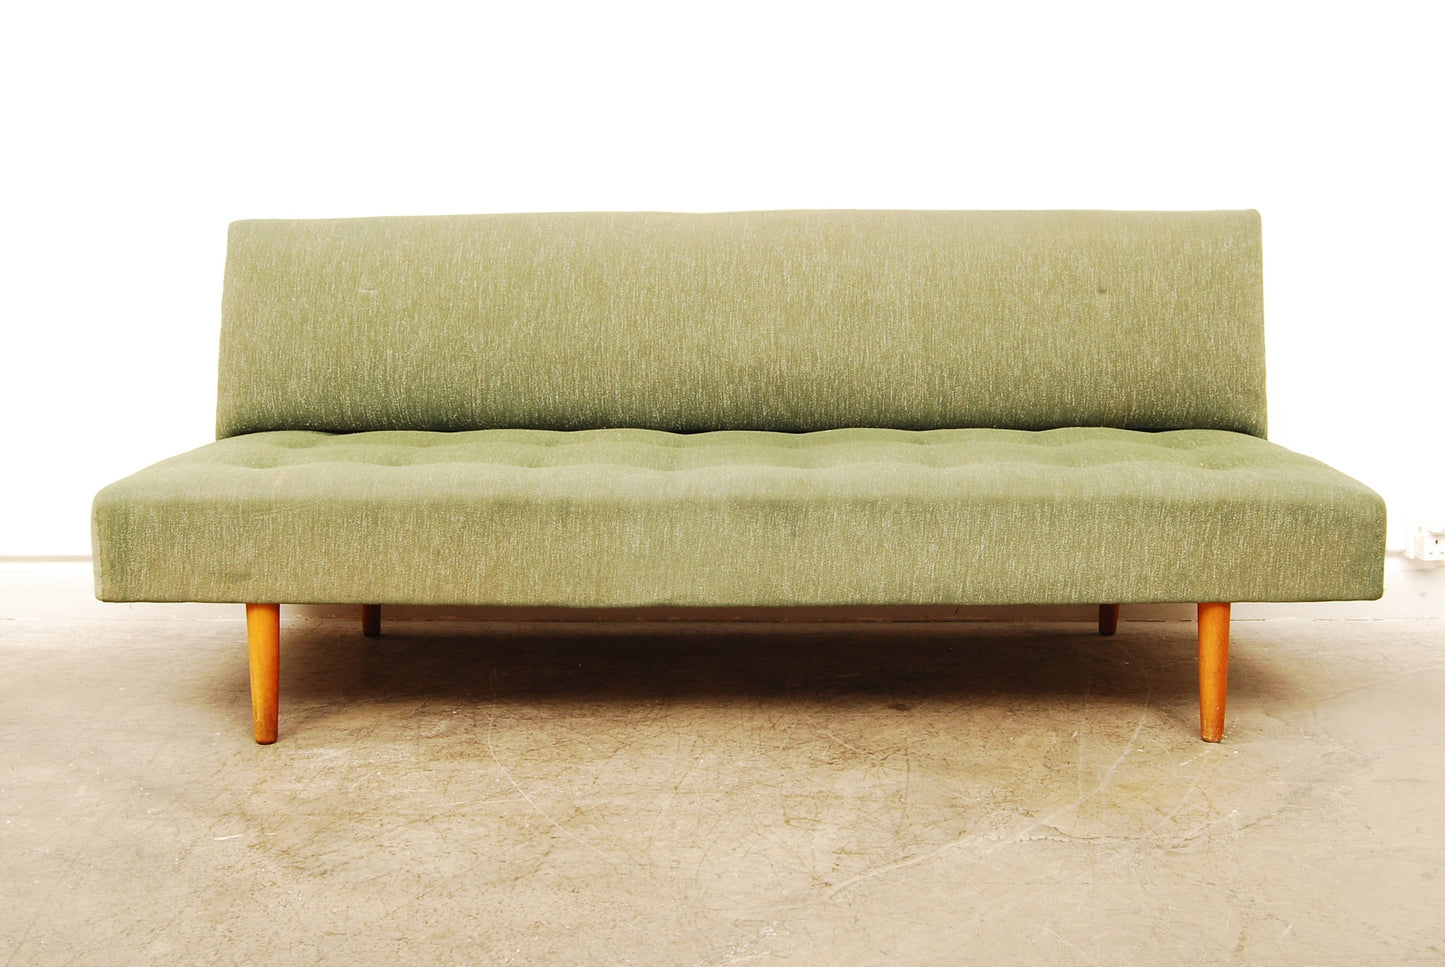 1950s daybed with backrest